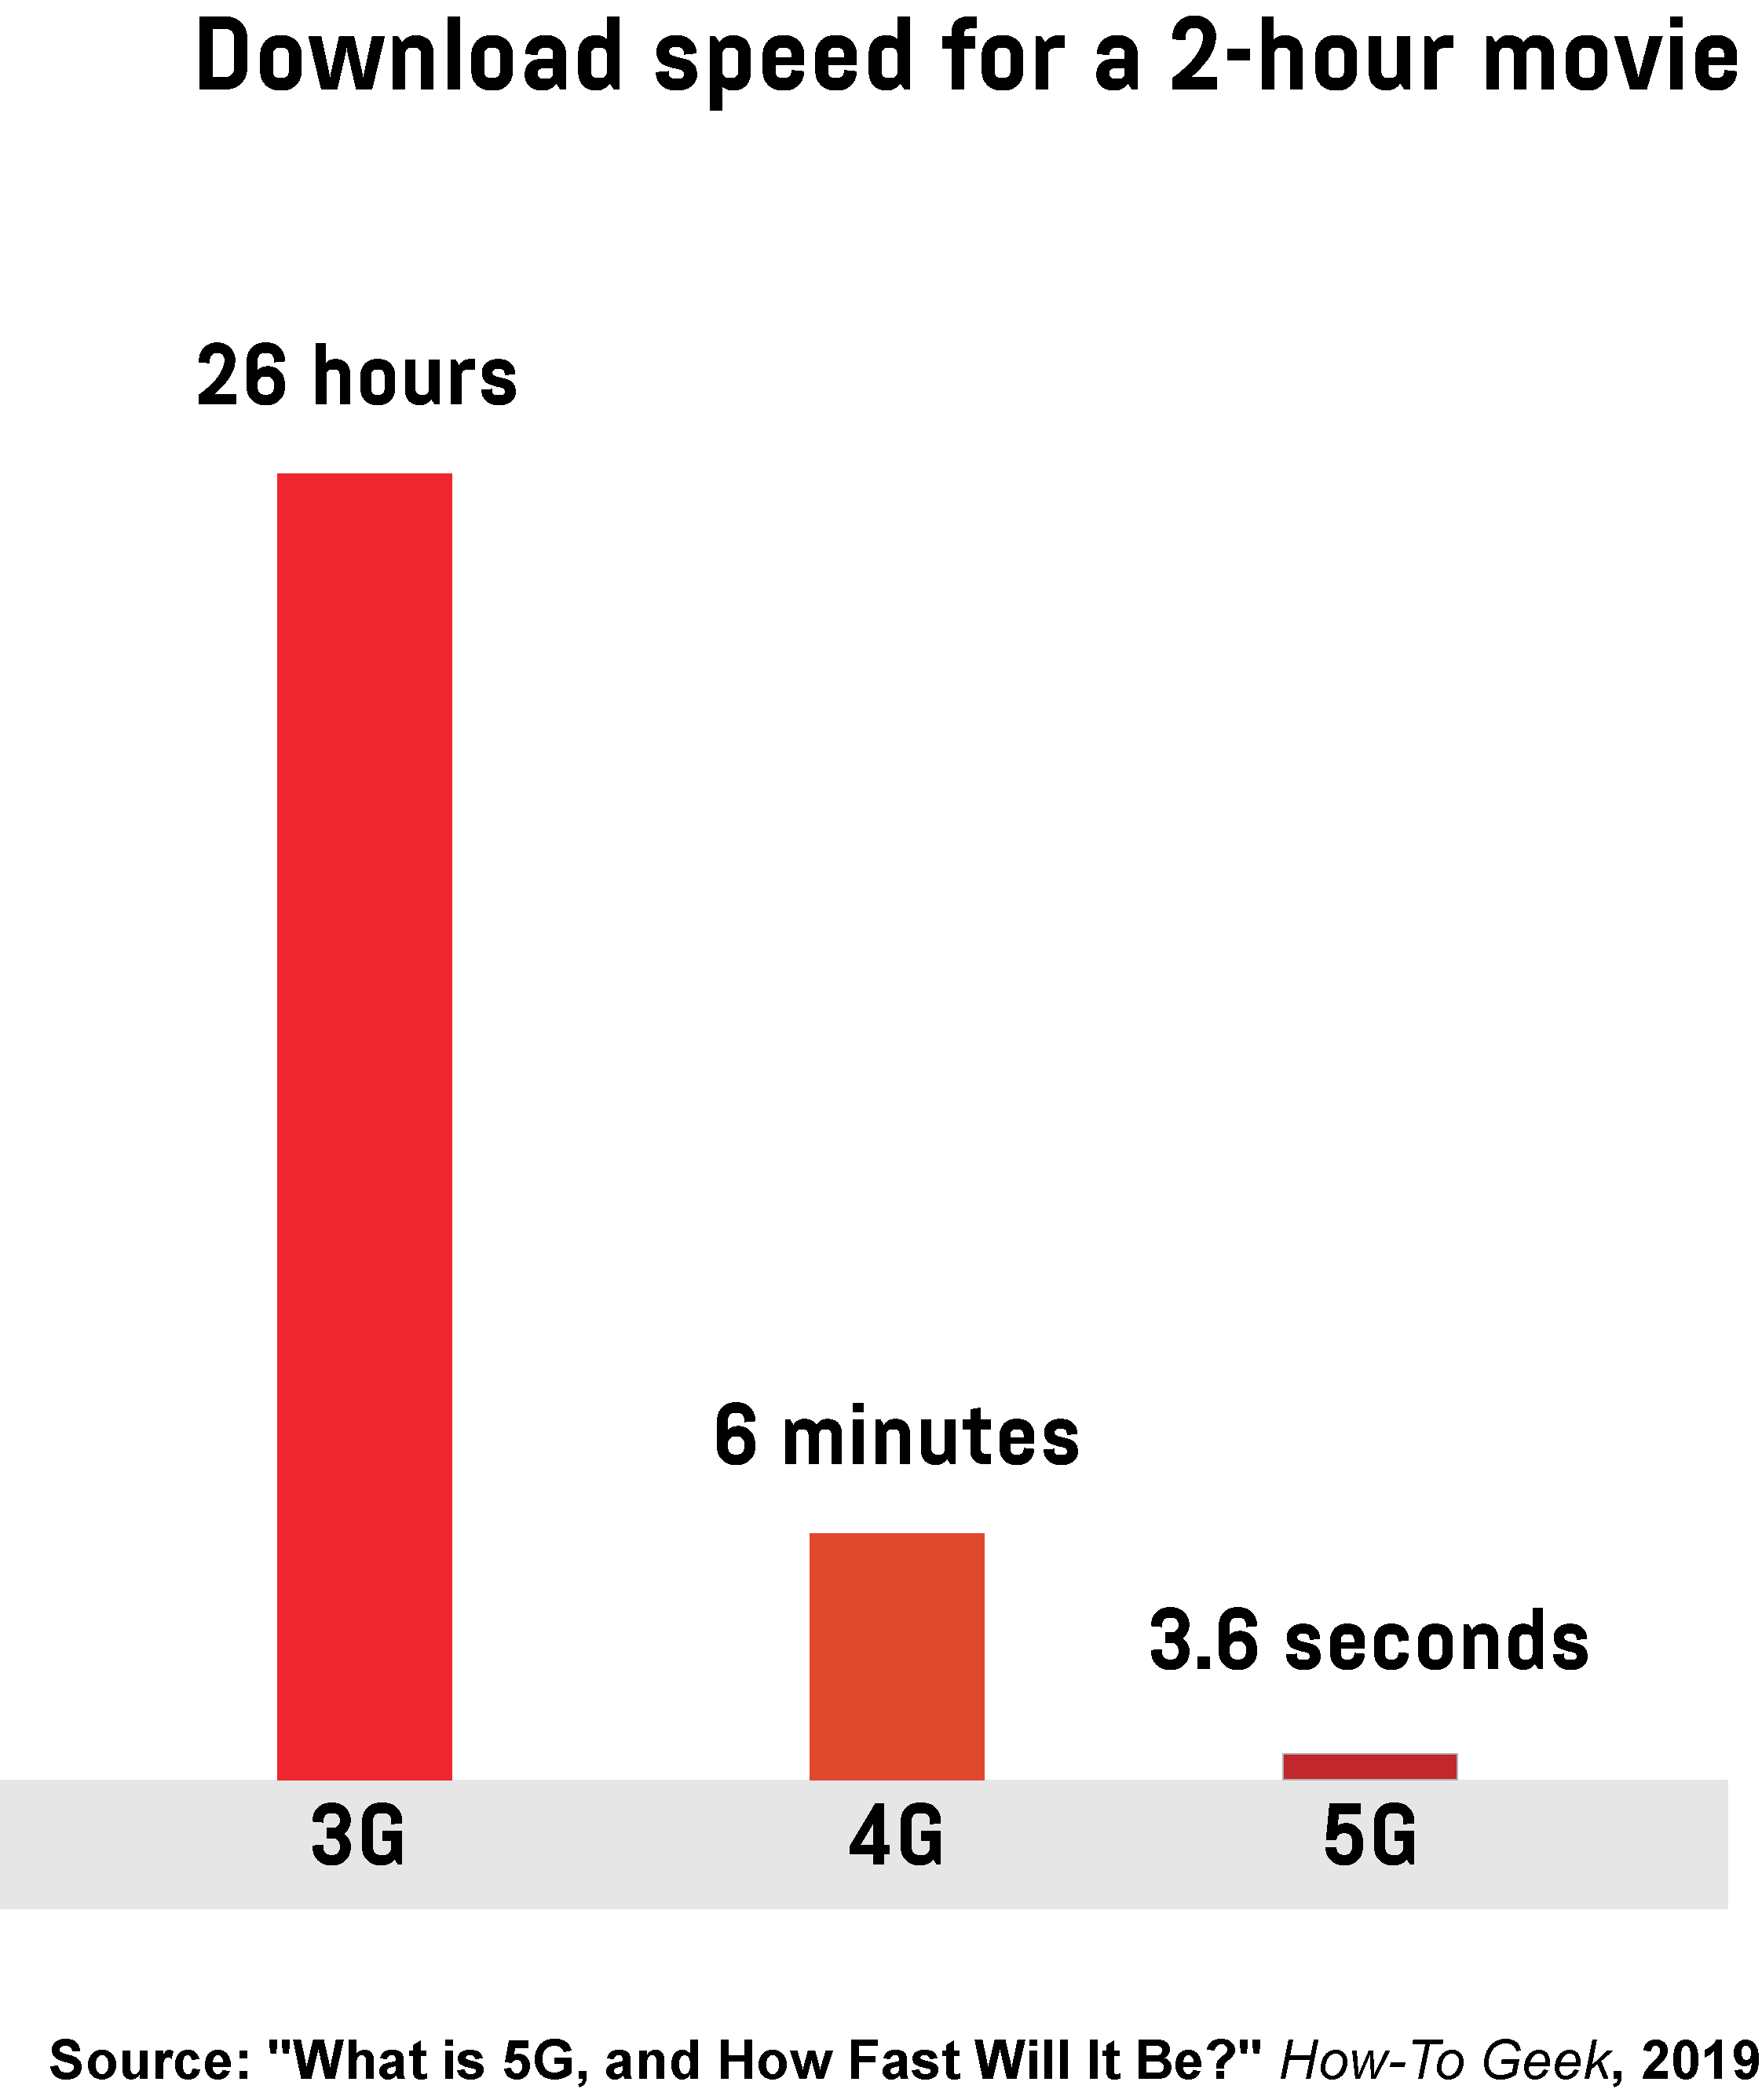 A bar graph showing the download speed for a 2-hour movie on 3G, 4G, and 5G networks.